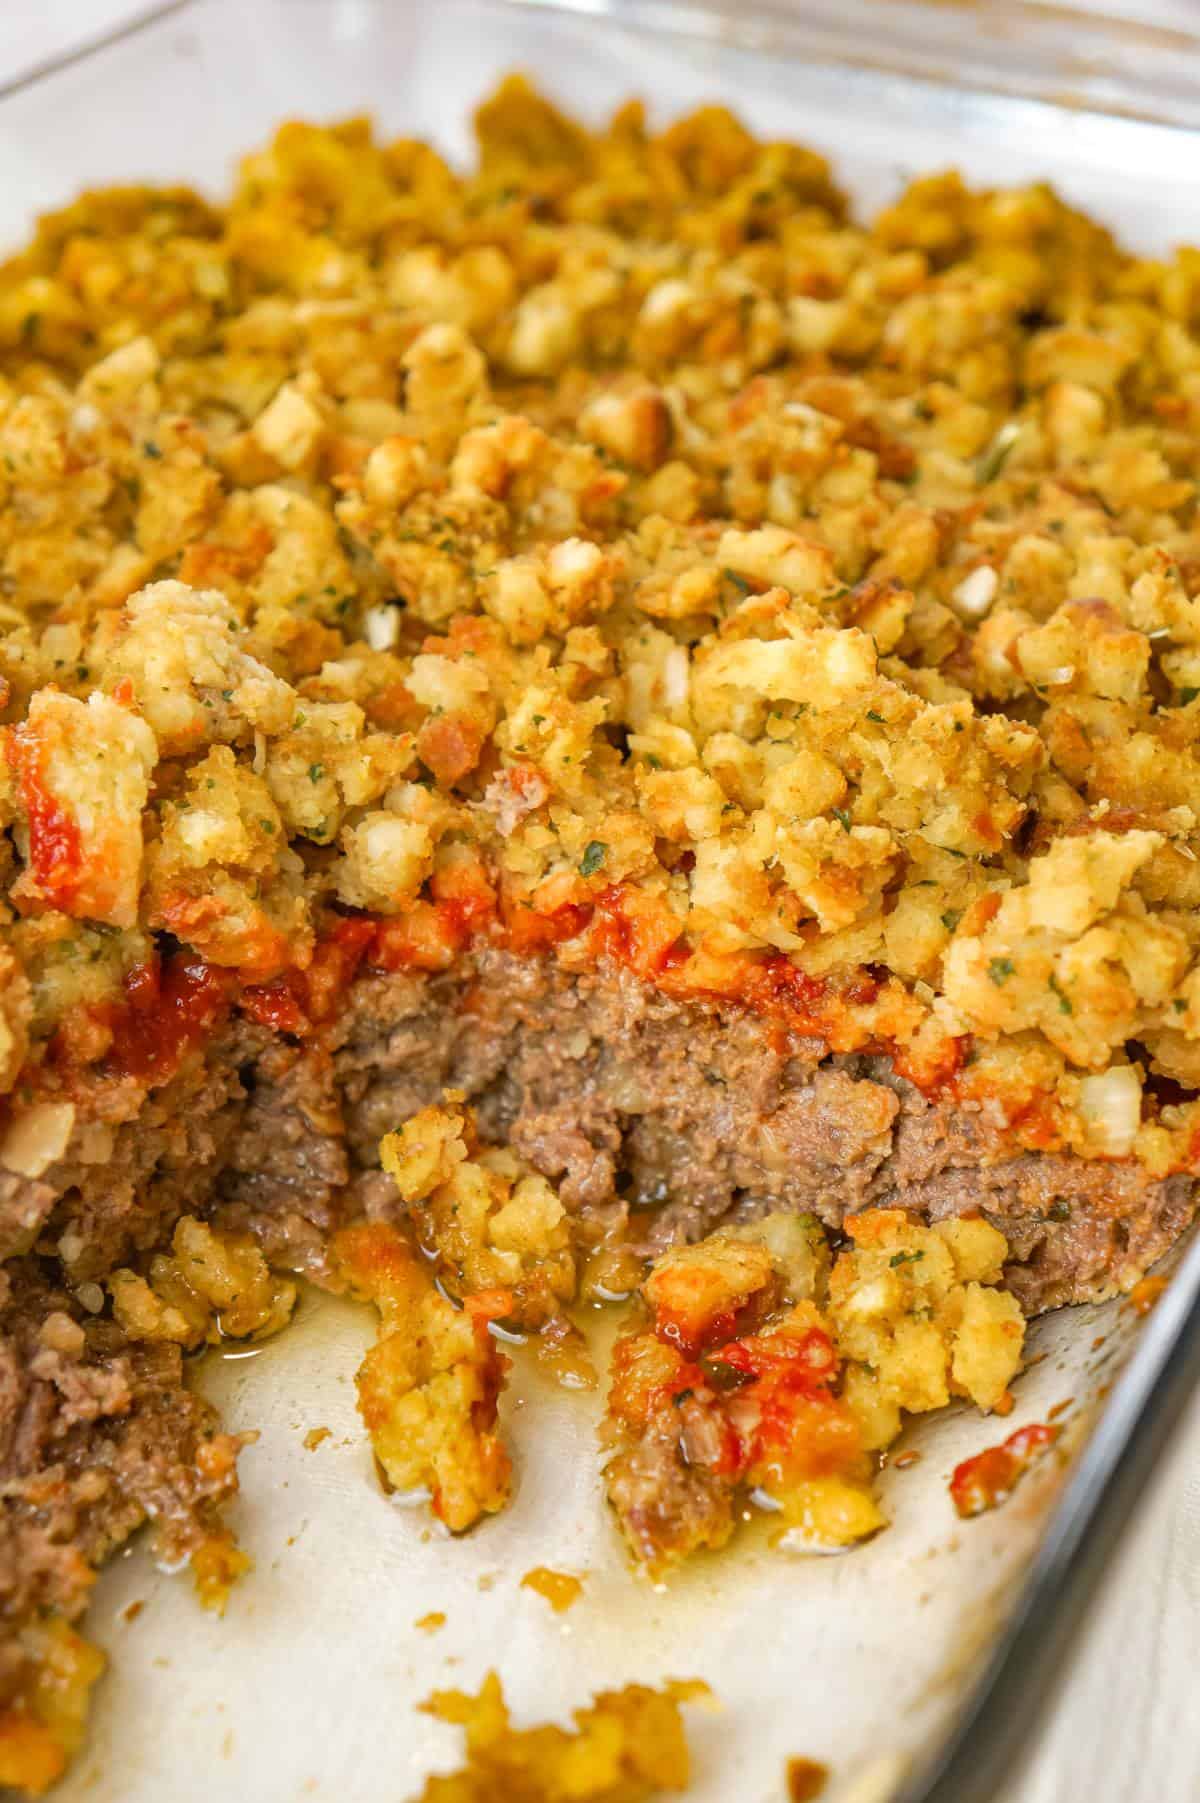 Meatloaf and Stuffing Casserole is an easy ground beef dinner recipe with a meatloaf base topped with stove top stuffing.